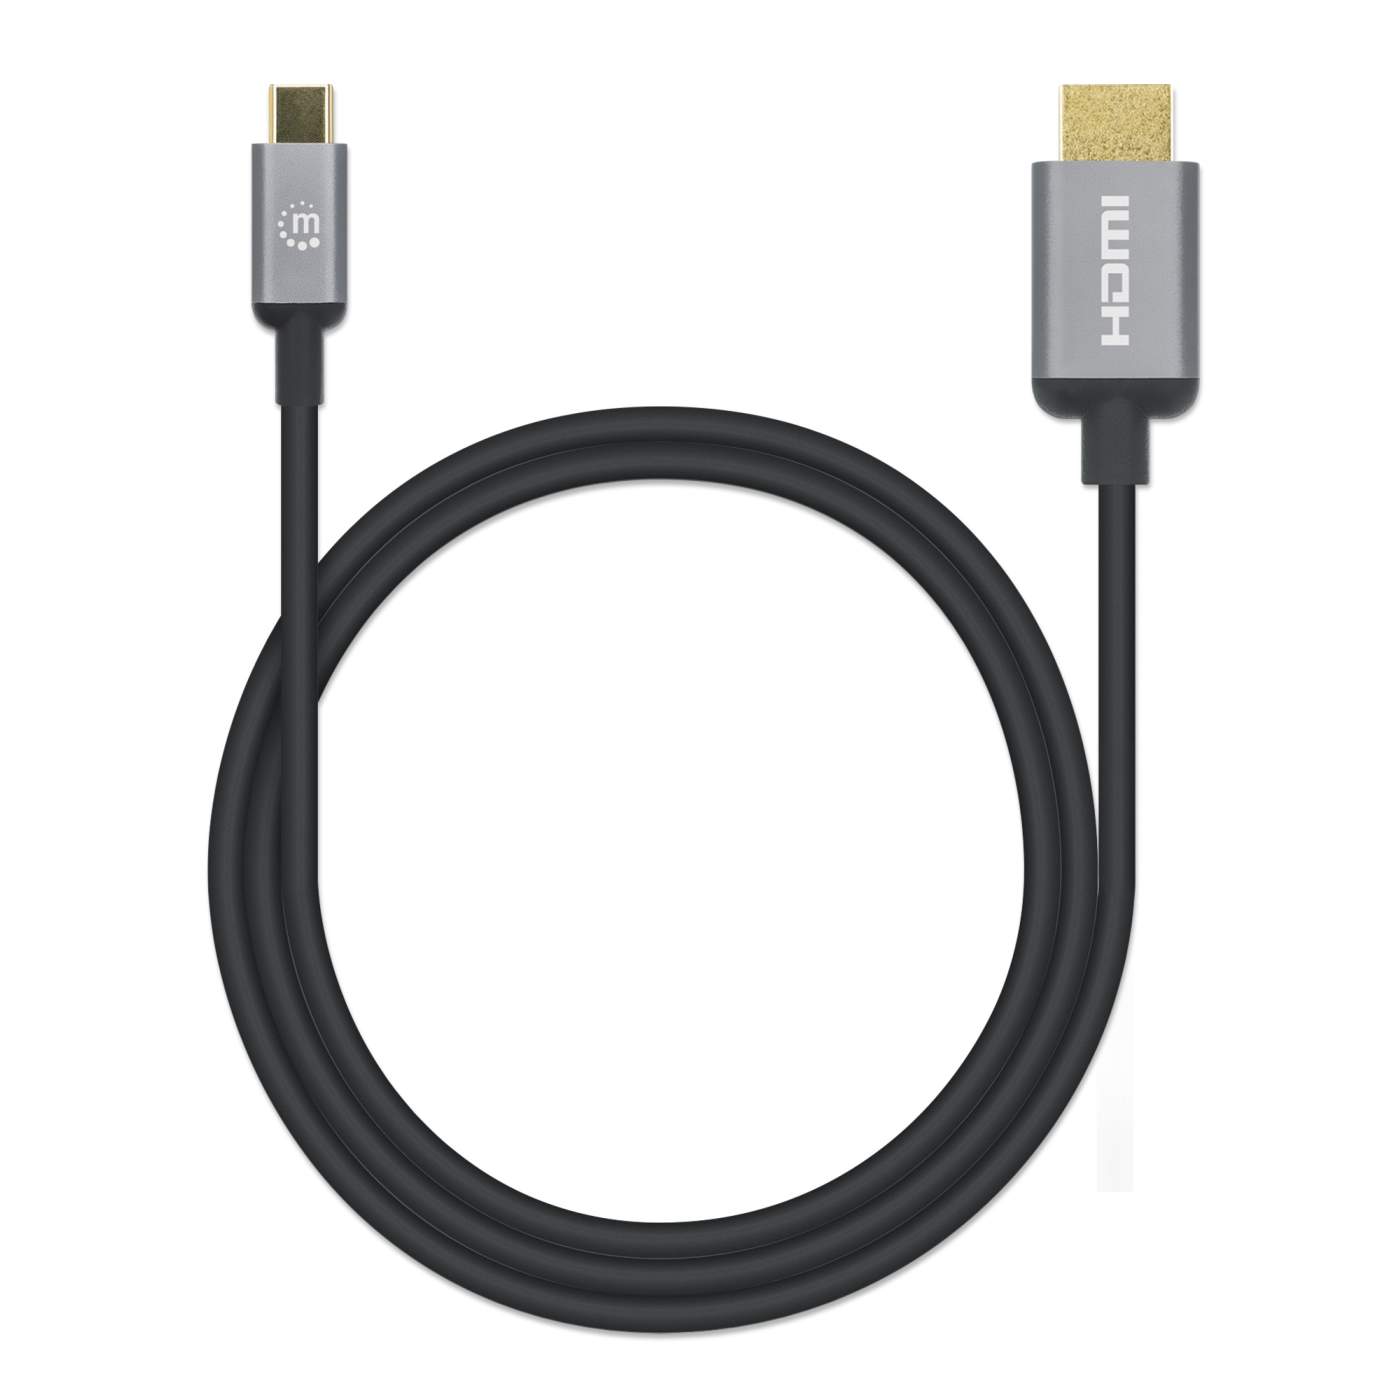 USB-C to HDMI Adapter Cable Image 6